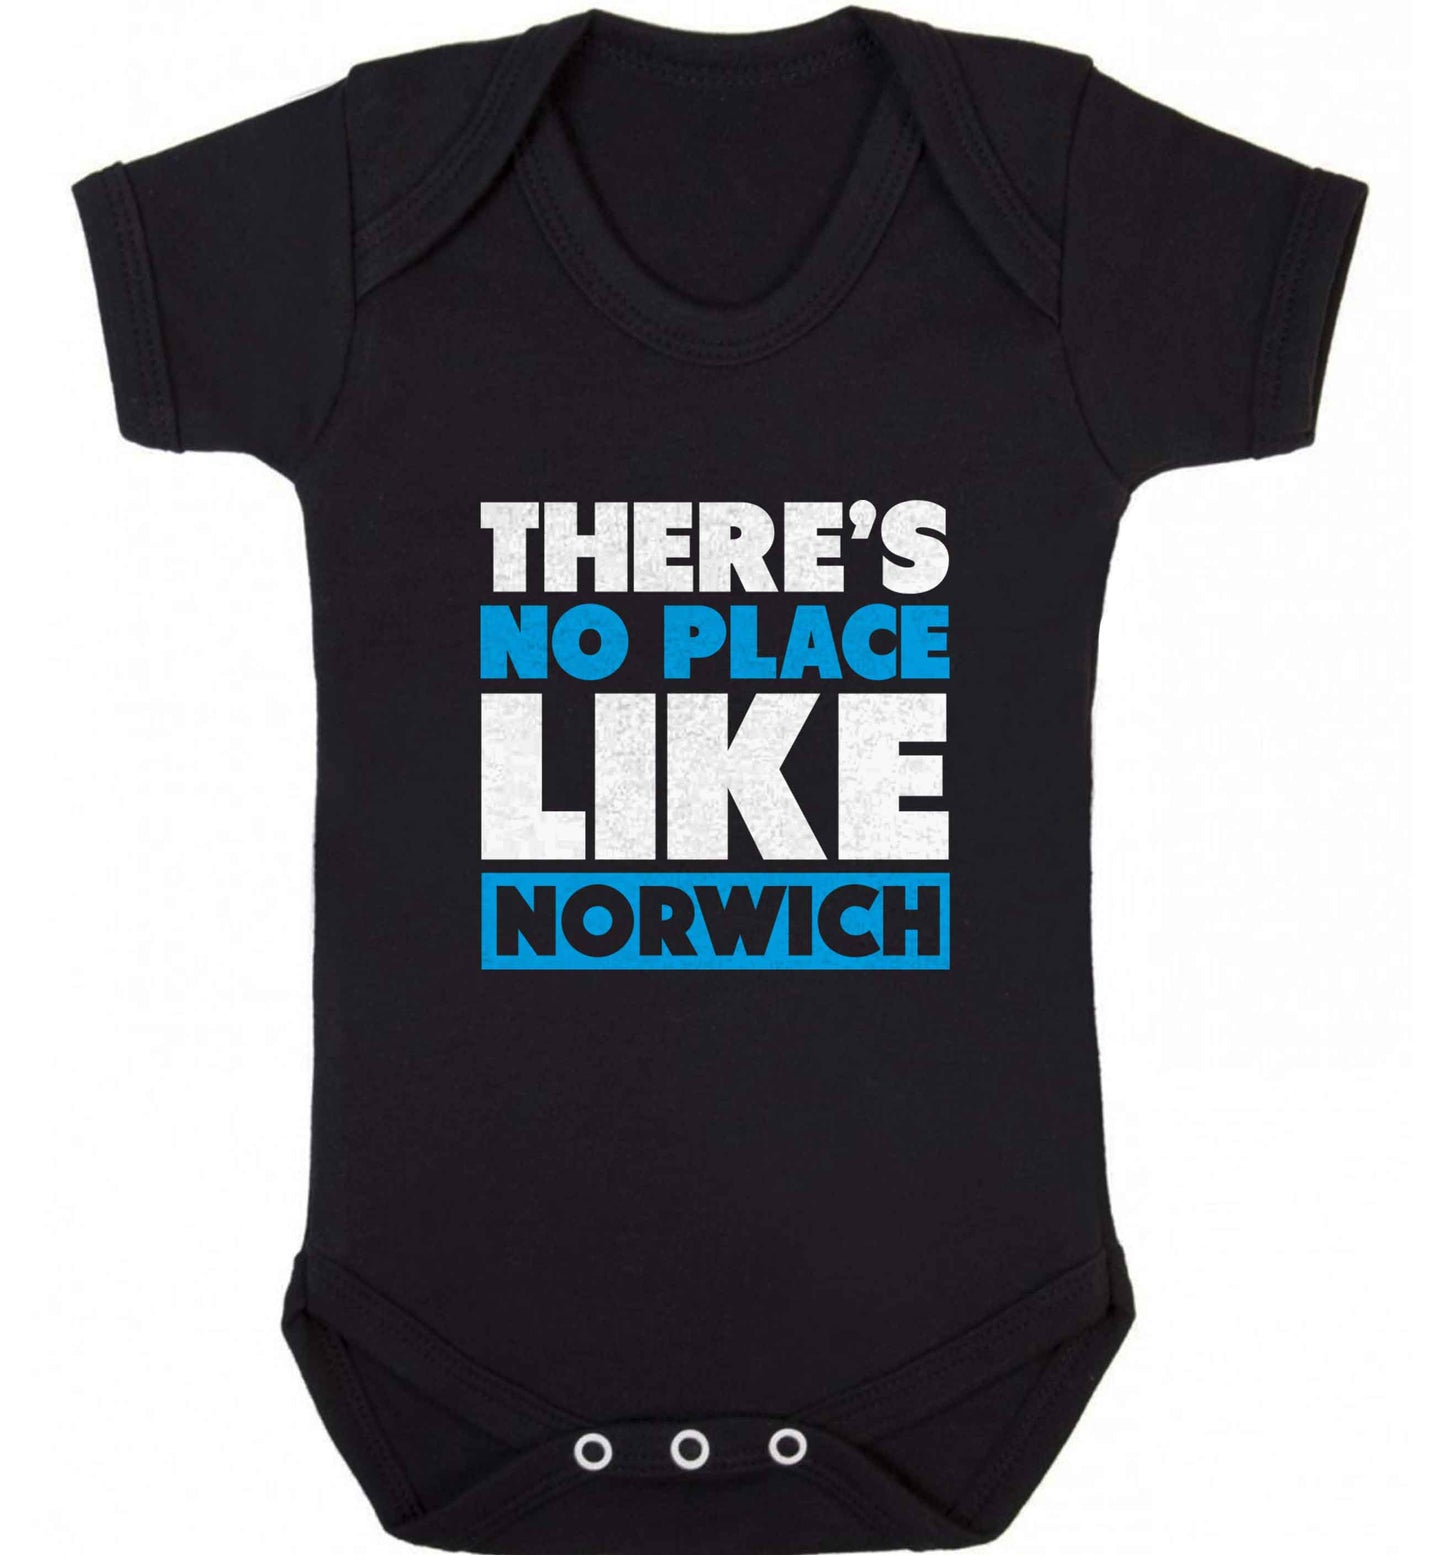 There's no place like Norwich baby vest black 18-24 months